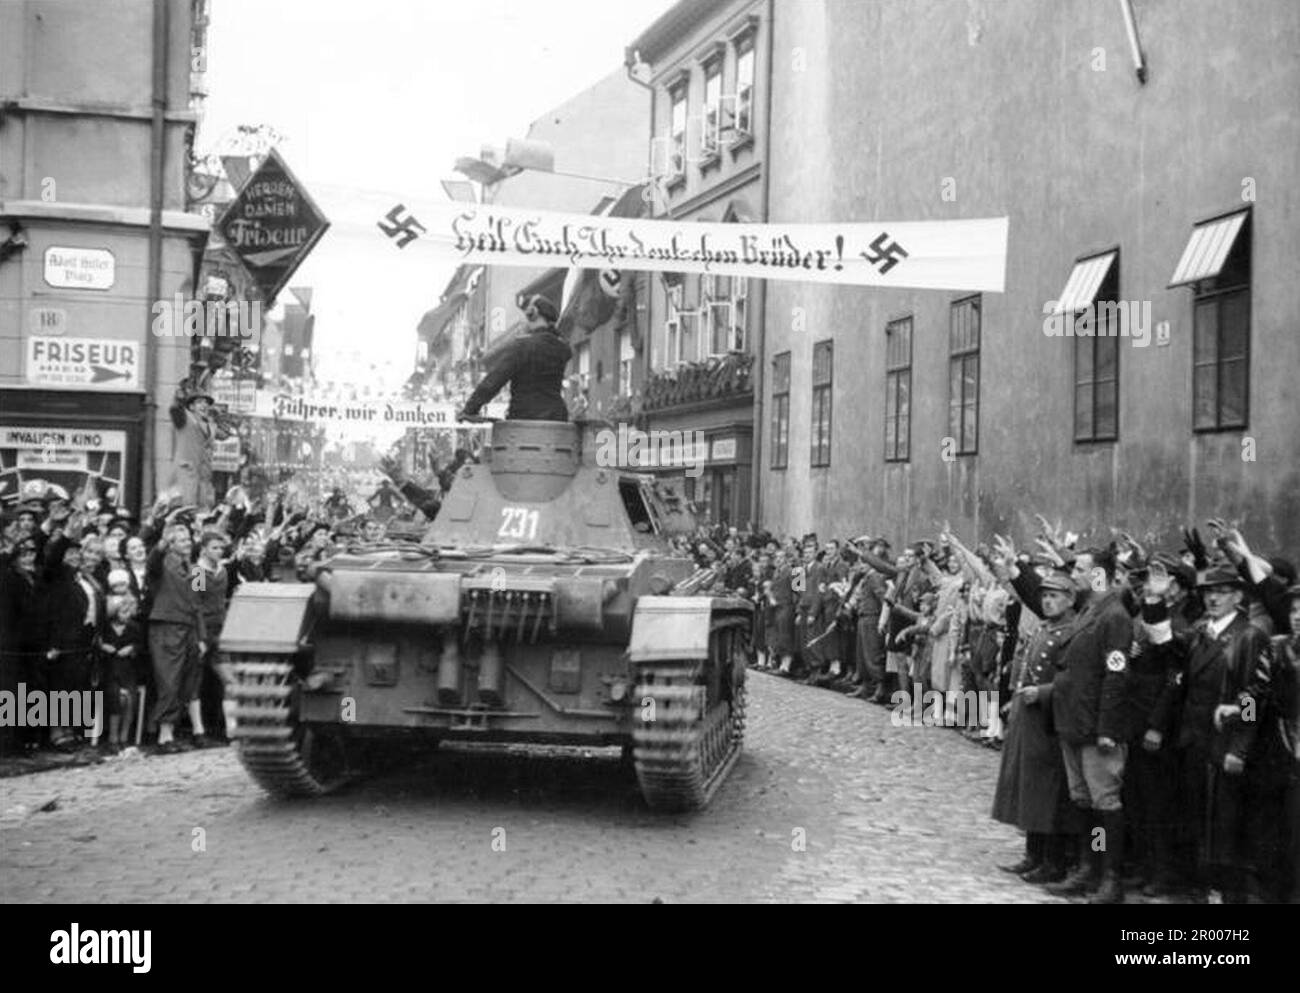 Heavy German Tanks drive through the city of Komtau in the Sudeten on 9.Oct.1938 fter the annexation of the Sudetenland. After the annexation of Austria, Hitler demanded that he be given the Sudeten region of Czechoslovakia. At the Munich conference in September 1938 the Western powers agreed to this and the nazis occupied the area. Not long after Hitler broke his promise and invaded the rest of Czechoslovakia before turning his attention to Poland. Bundesarchiv, Bild 146-1969-065-26 / CC-BY-SA 3.0 Stock Photo